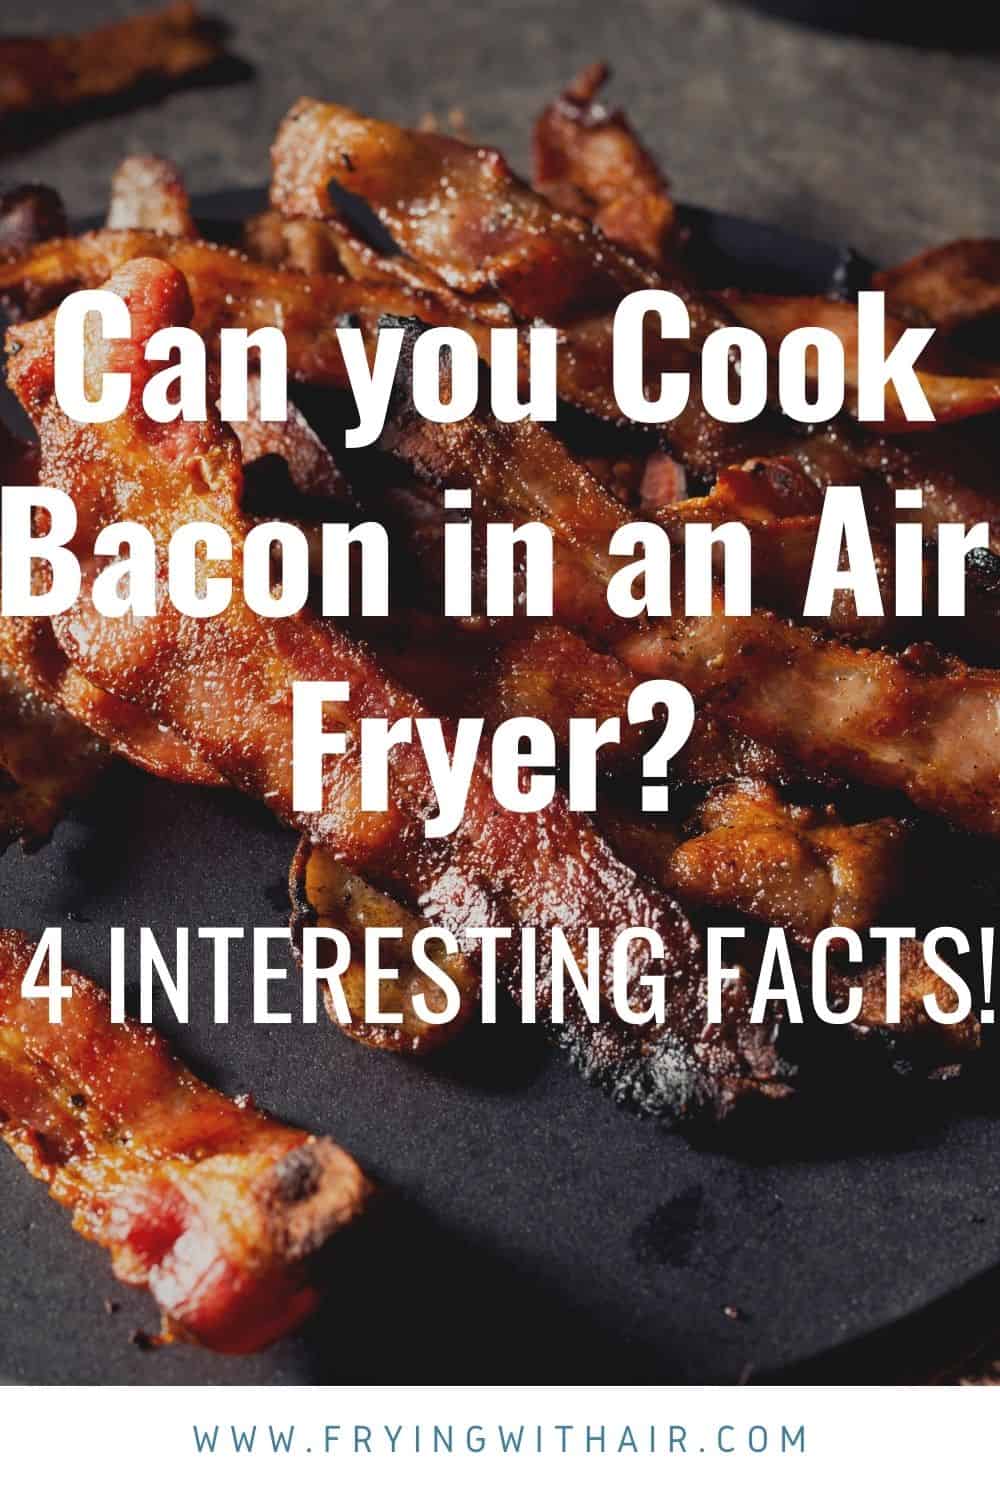 can you cook bacon in an air fryer